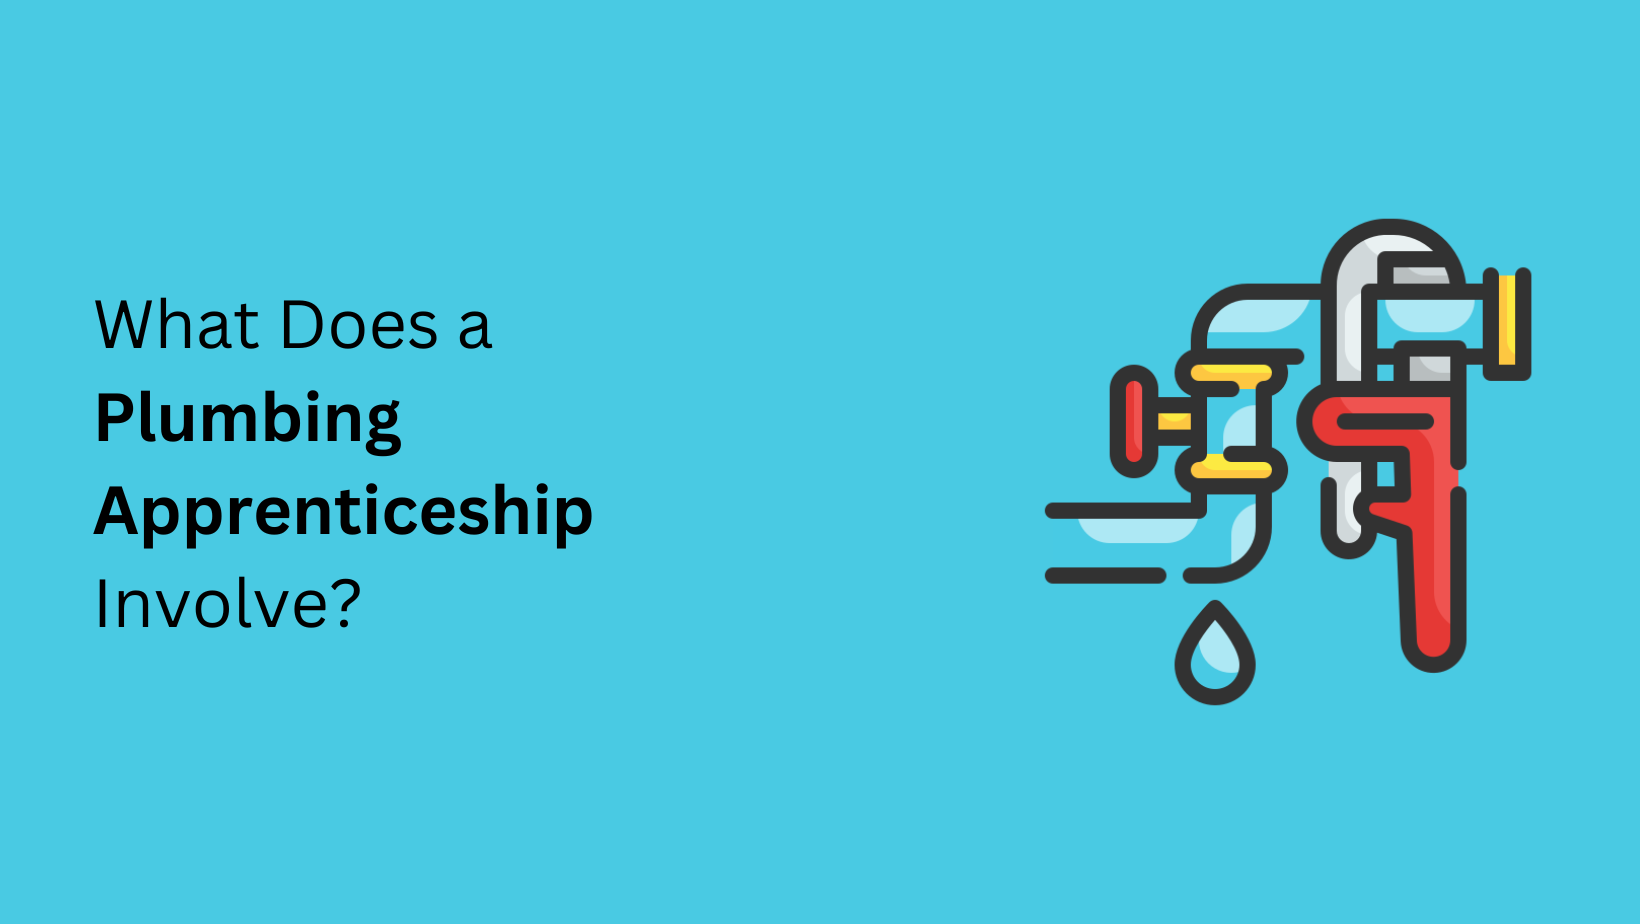 What Does a Plumbing Apprenticeship Involve